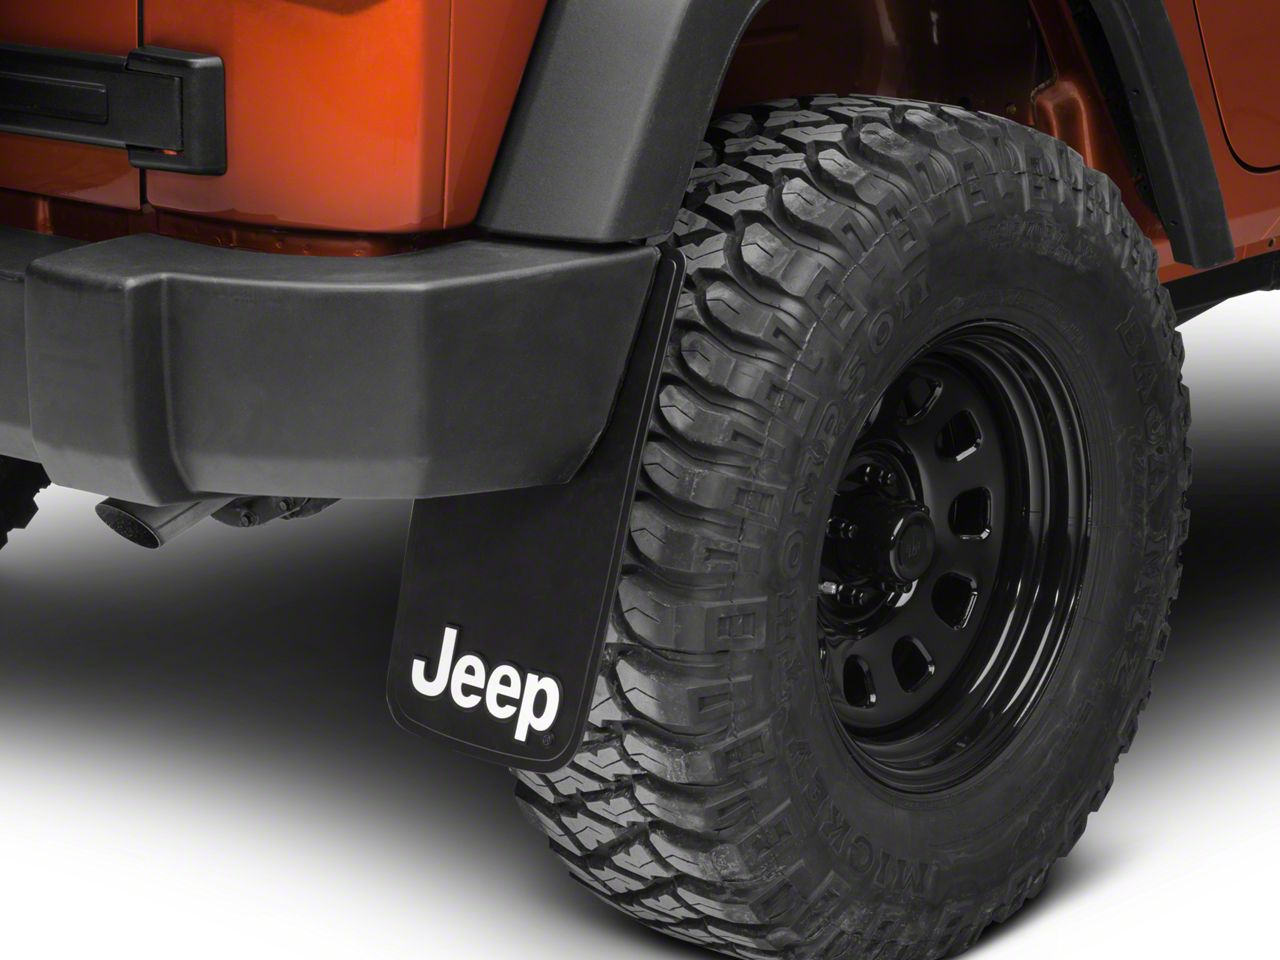 Jeep Mud Flaps & Guards